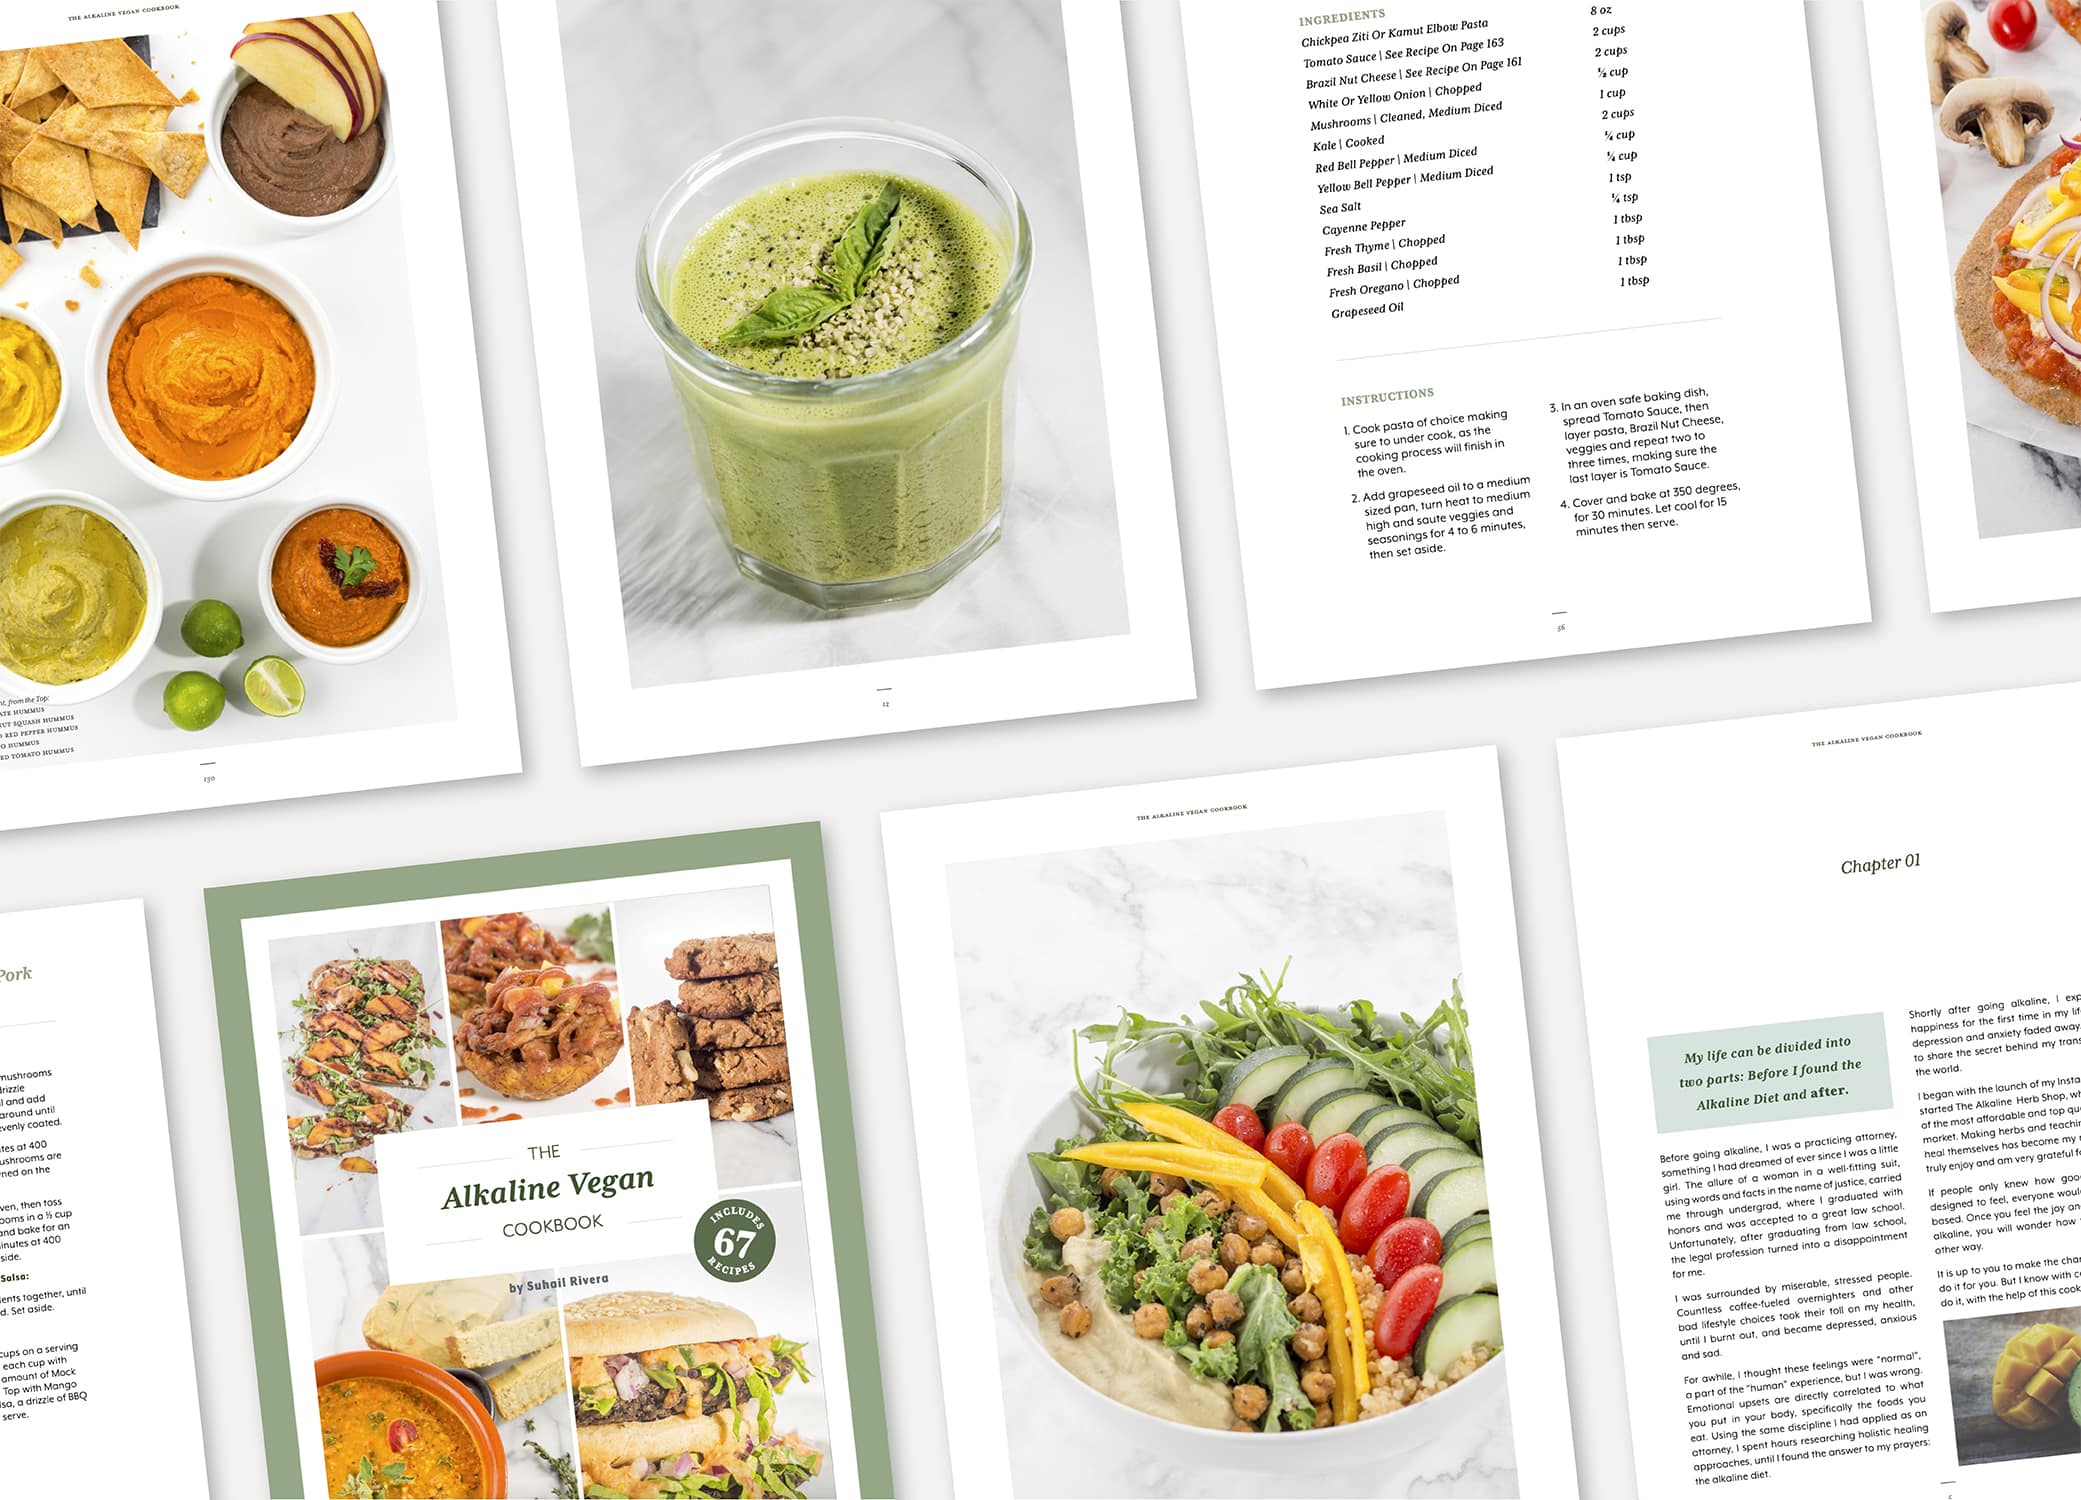 Alkaline Vegan Cookbook branded design in green and white showing 8 recipe pages and the dietary supplement packaging design.